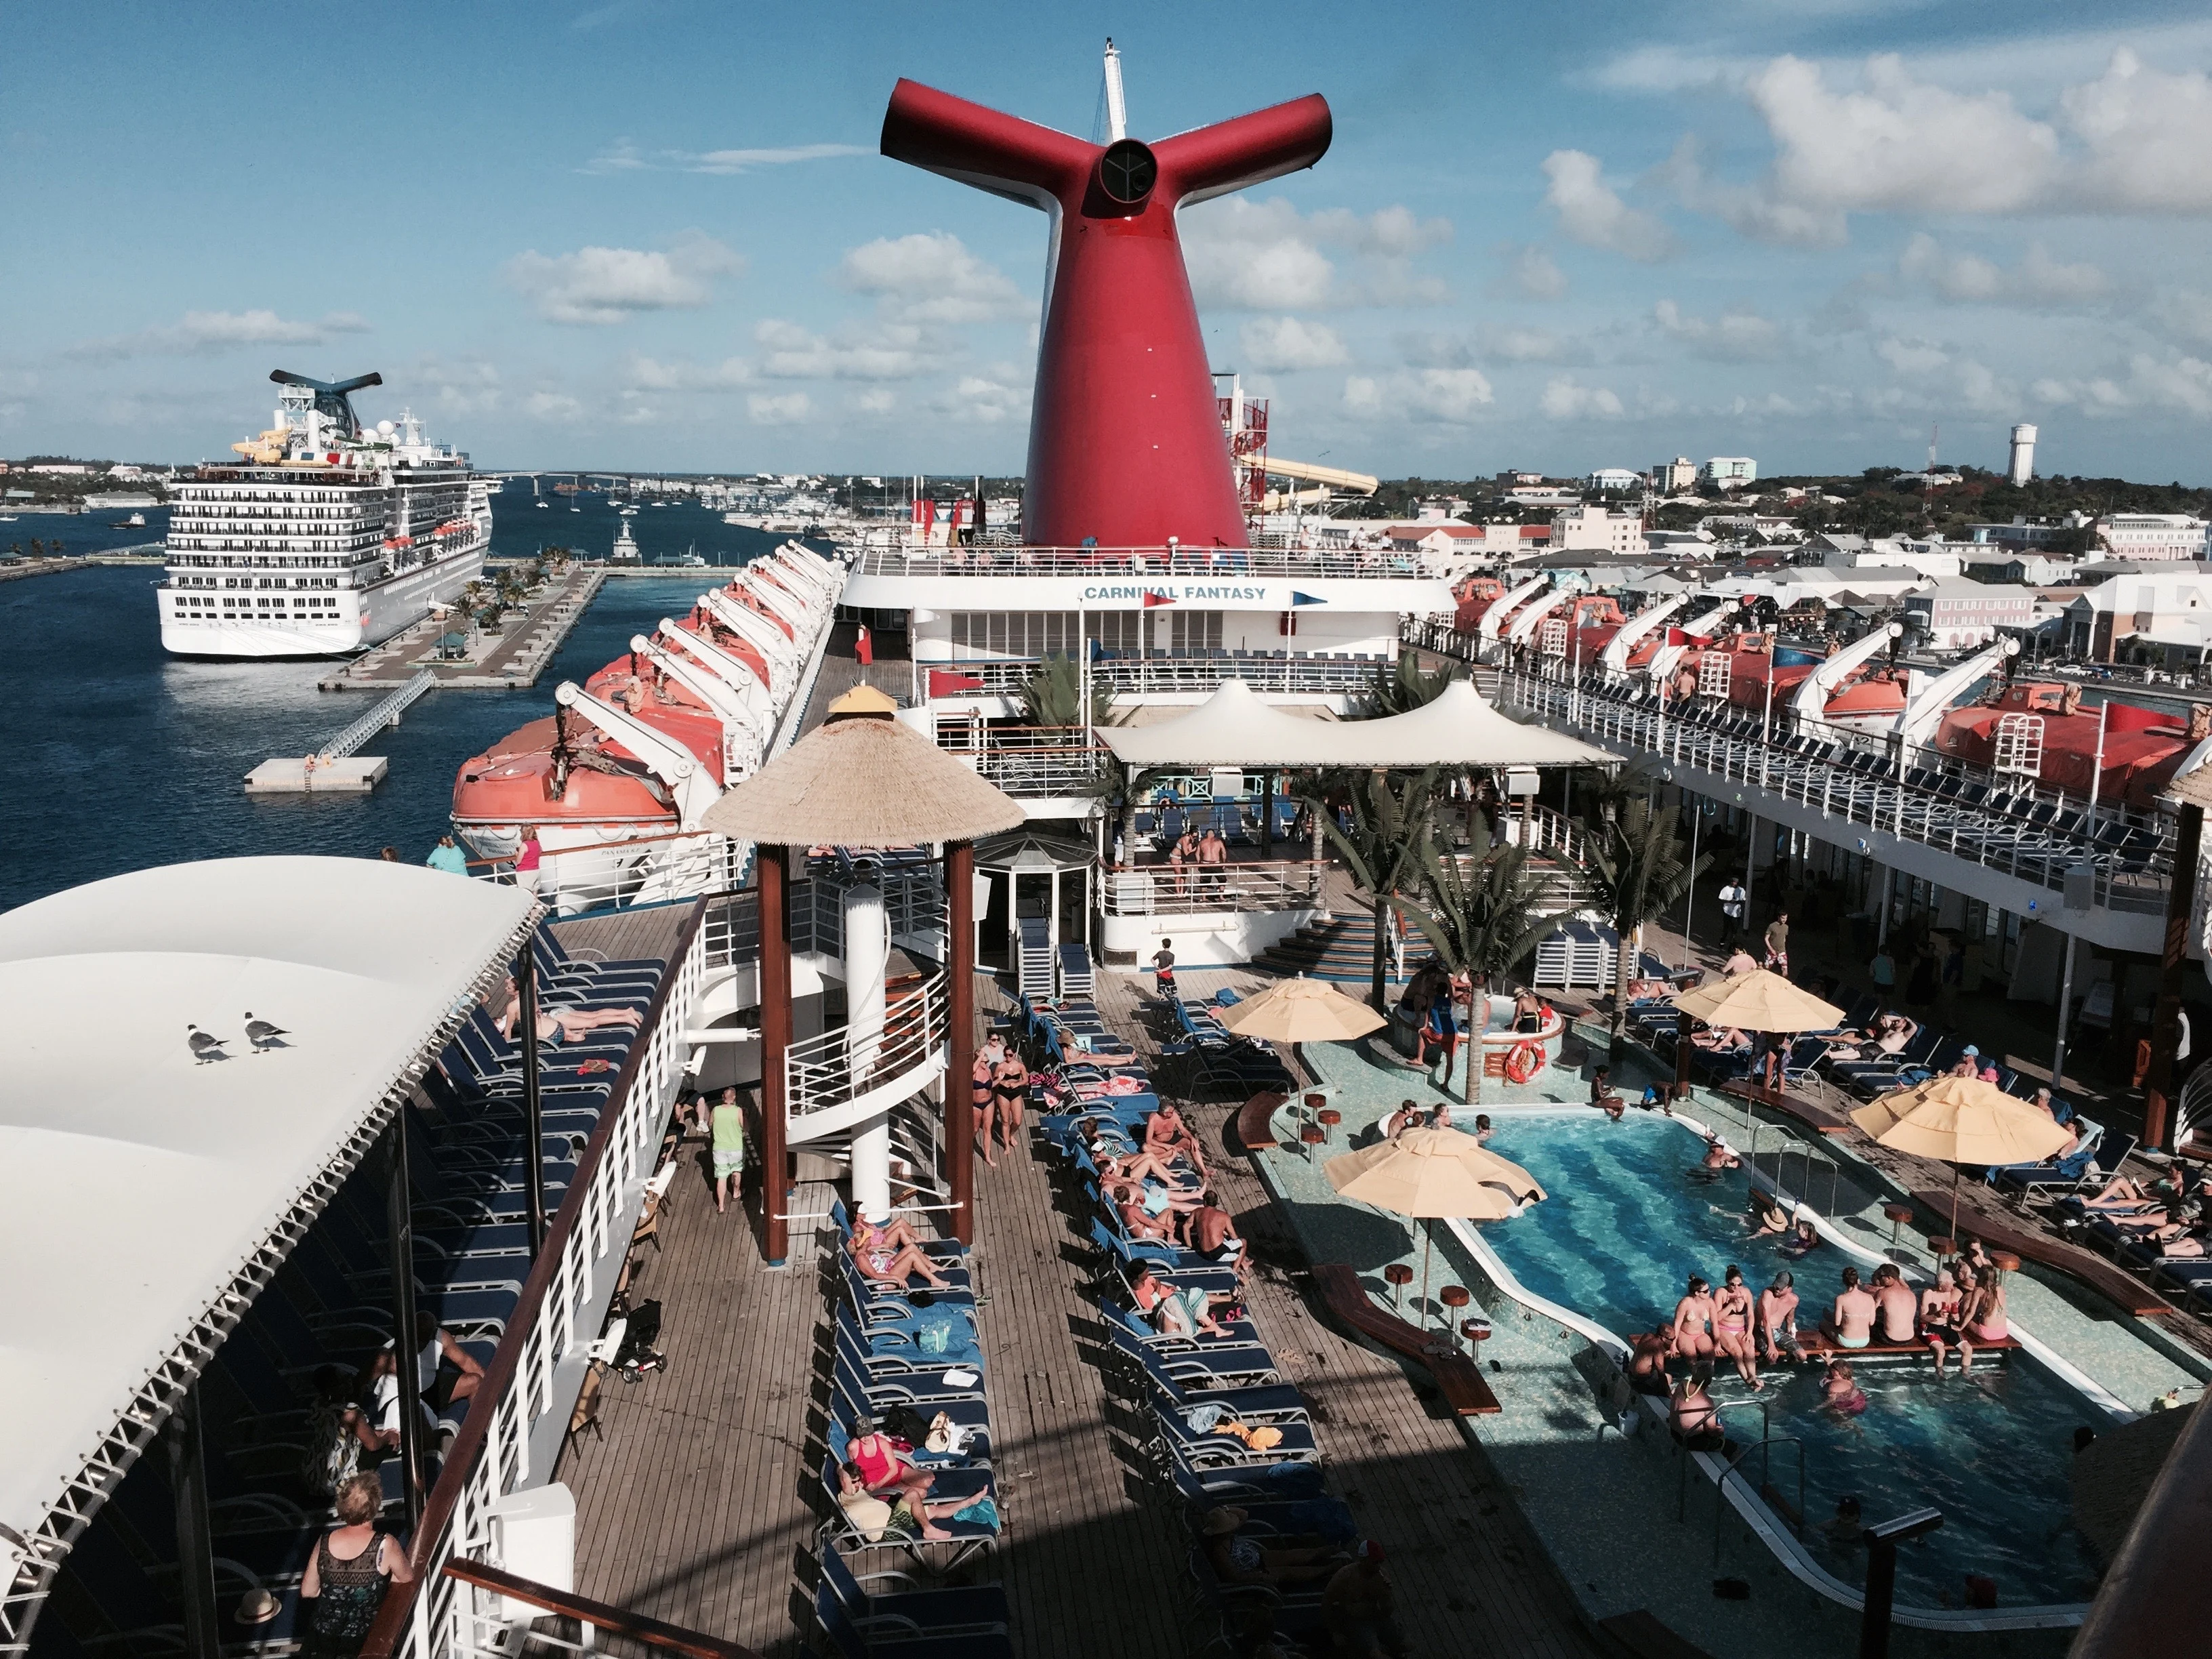 Wikimedia Commons (https://touristwire.com/wp-content/uploads/2023/05/Carnival_Fantasy_pool.jpg)